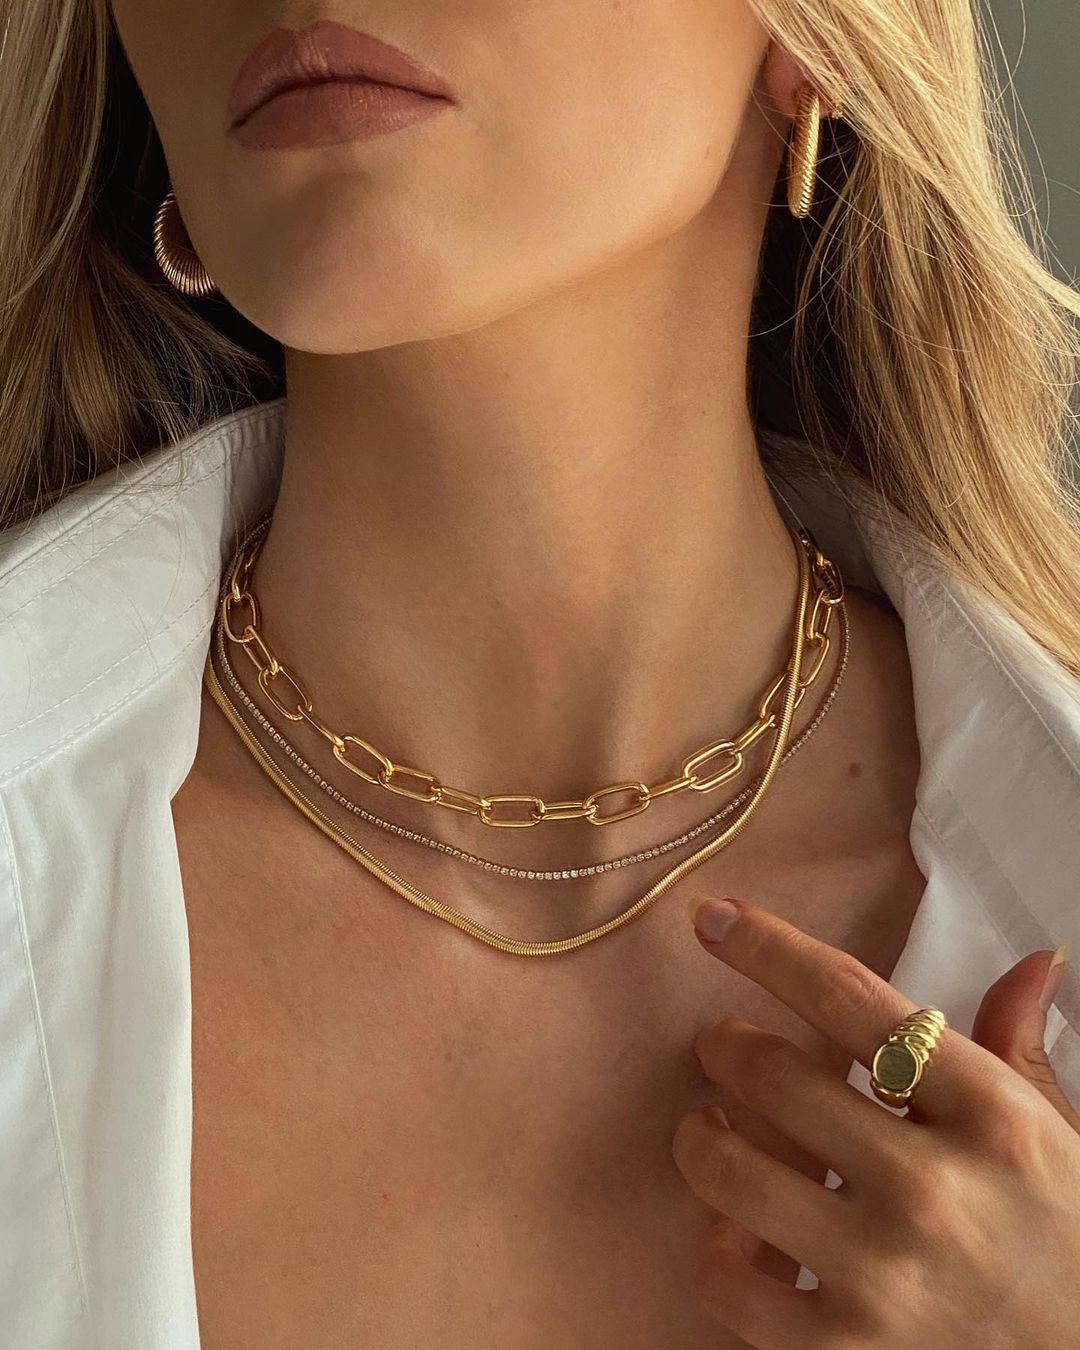 The Most Approved Jewelry Trends For Summer-End 